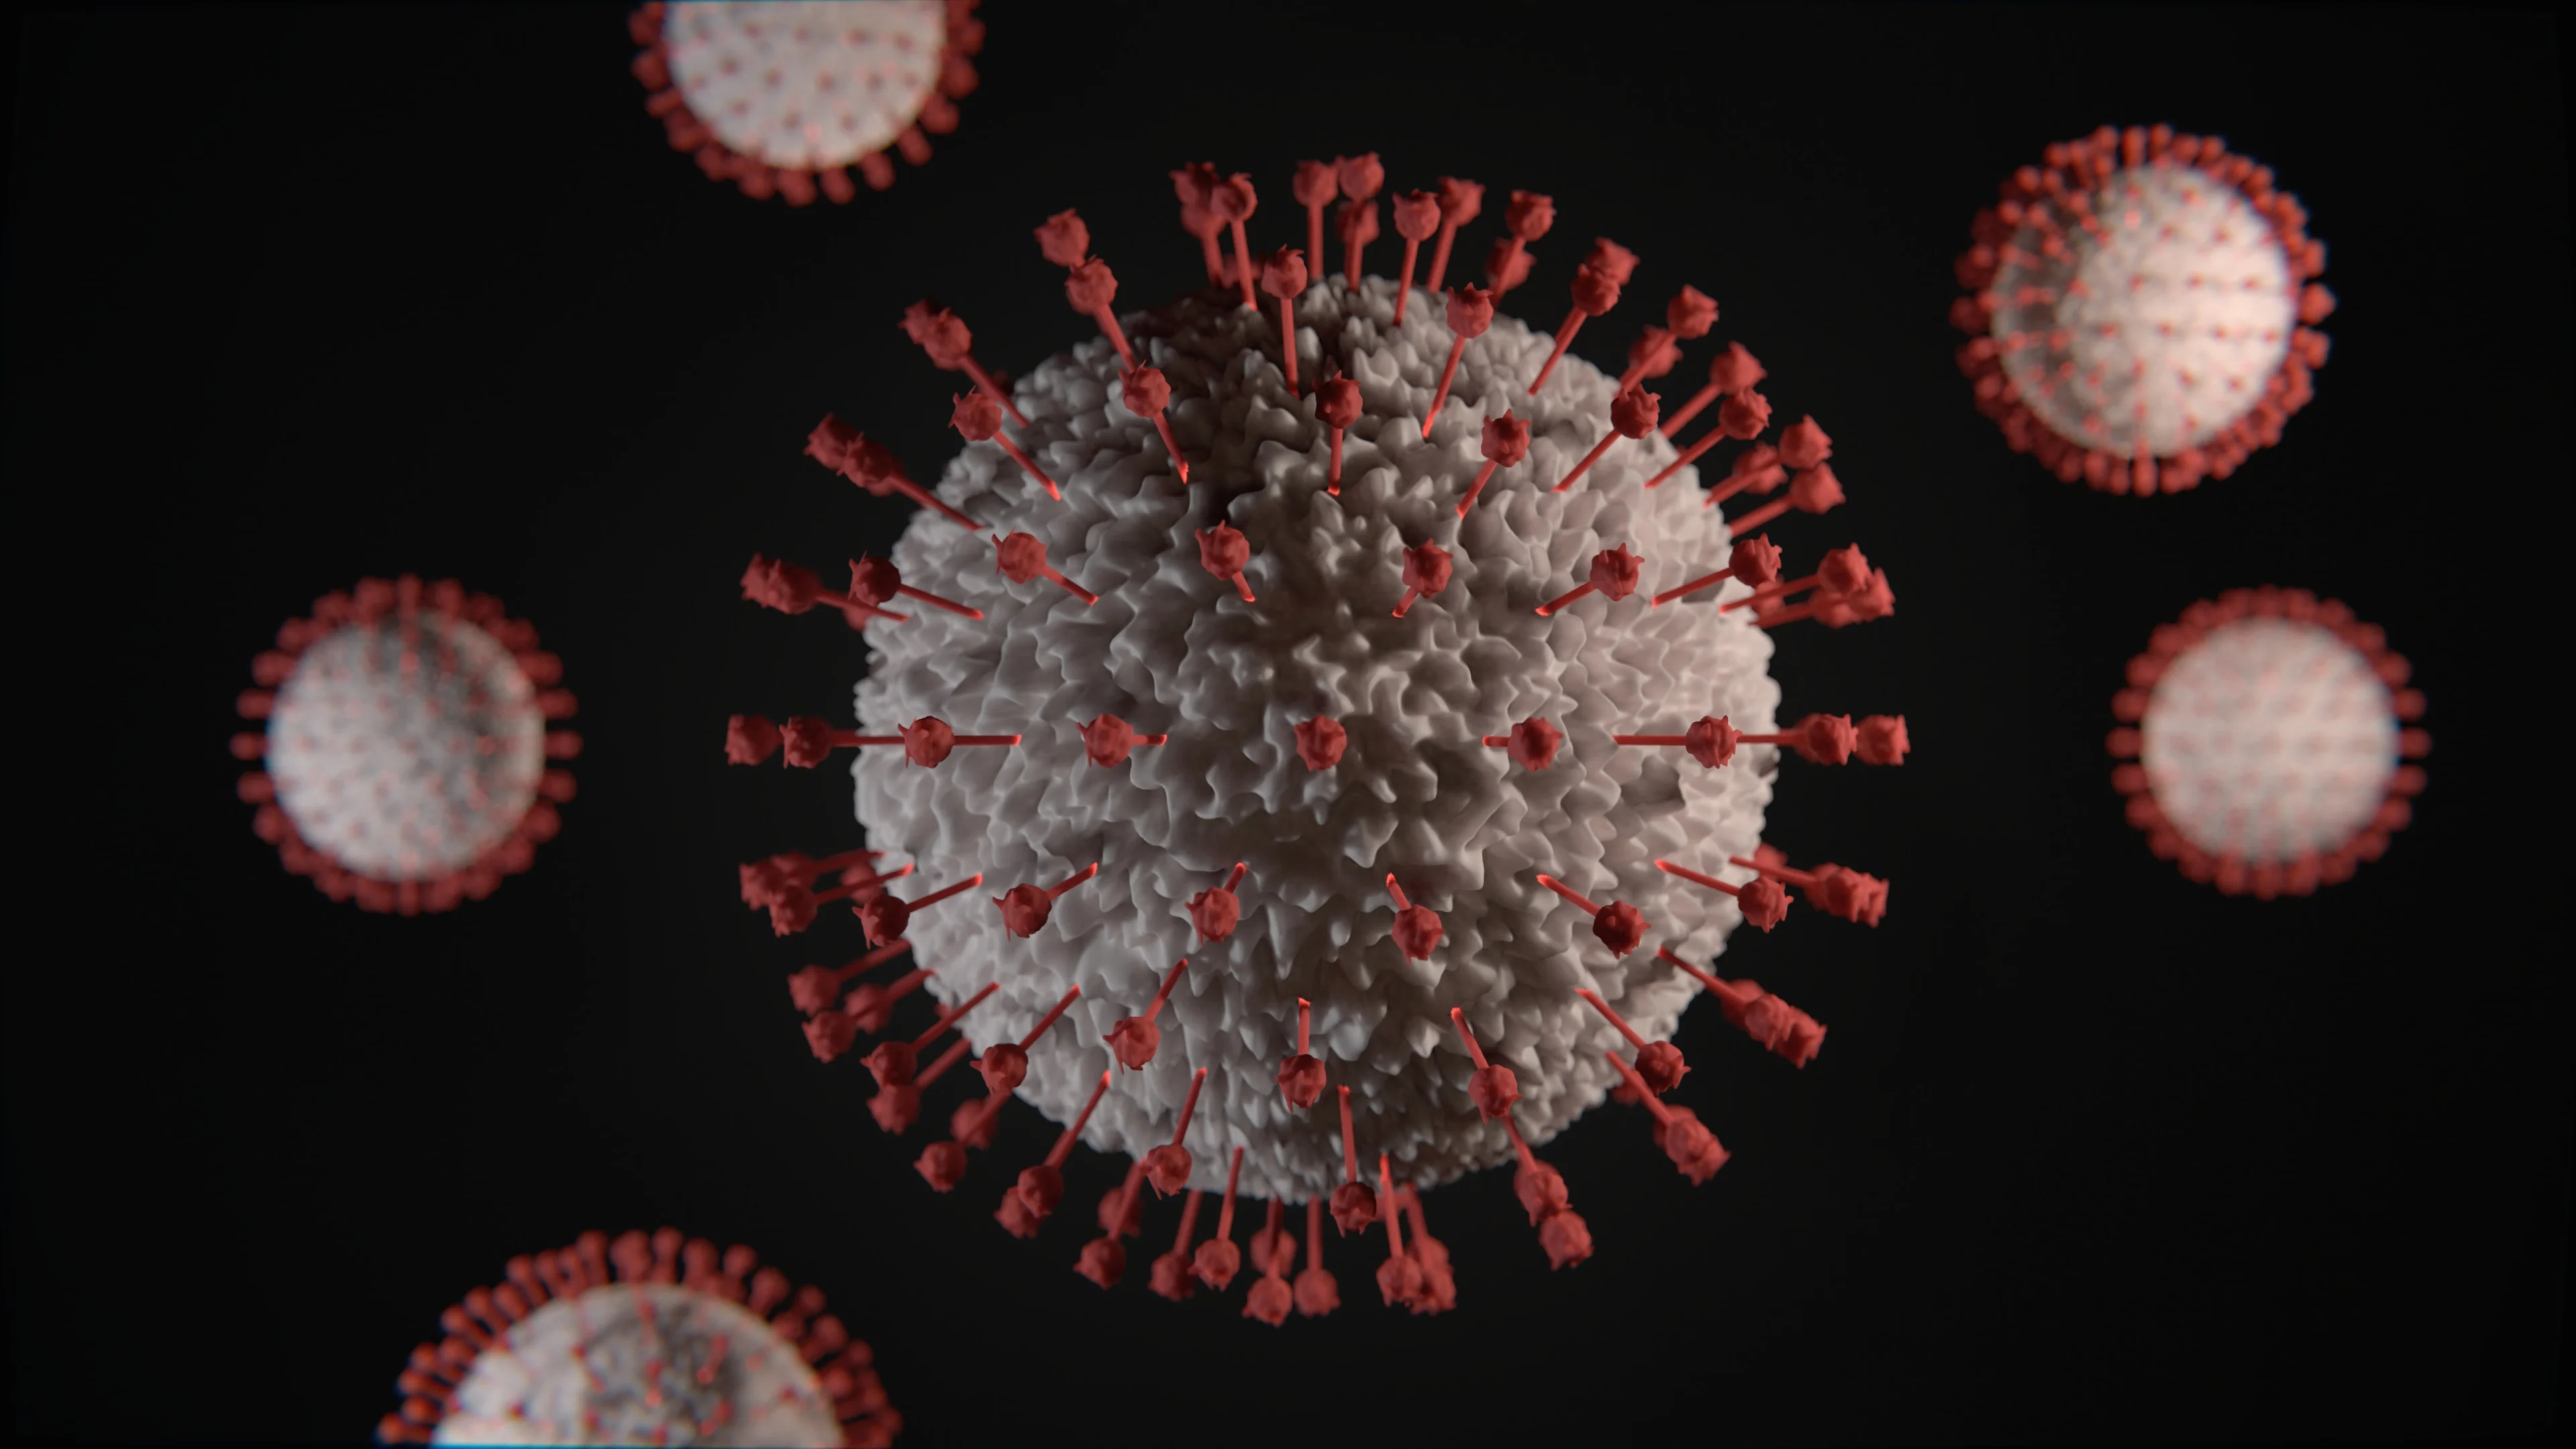 The COVID-19 virus pictured.